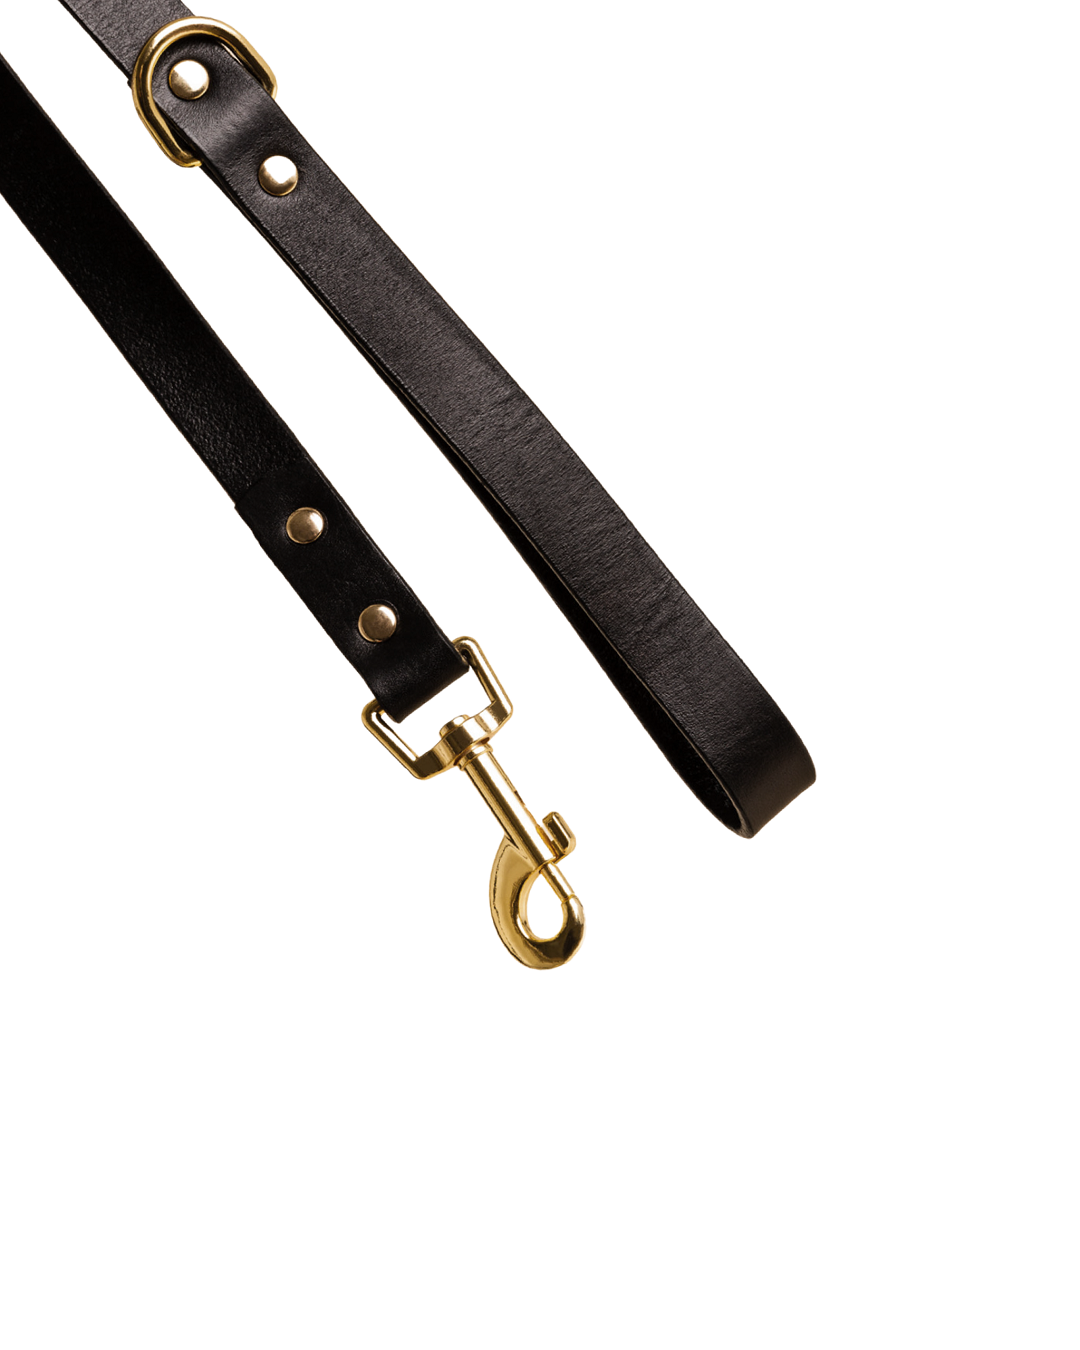 Ollie and James dog lead in sable black leather